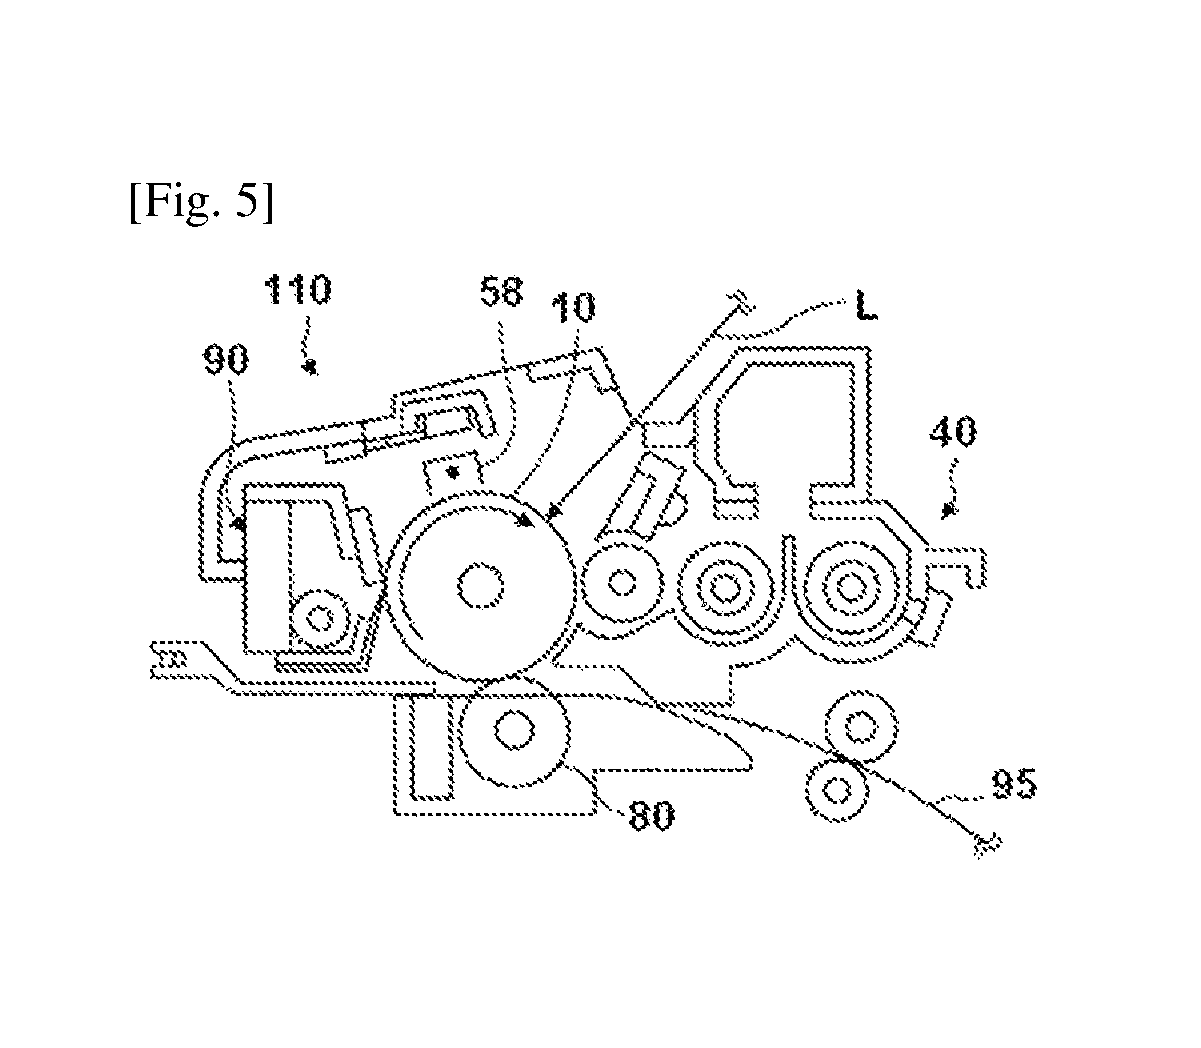 Toner, image forming apparatus, image forming method, and process cartridge